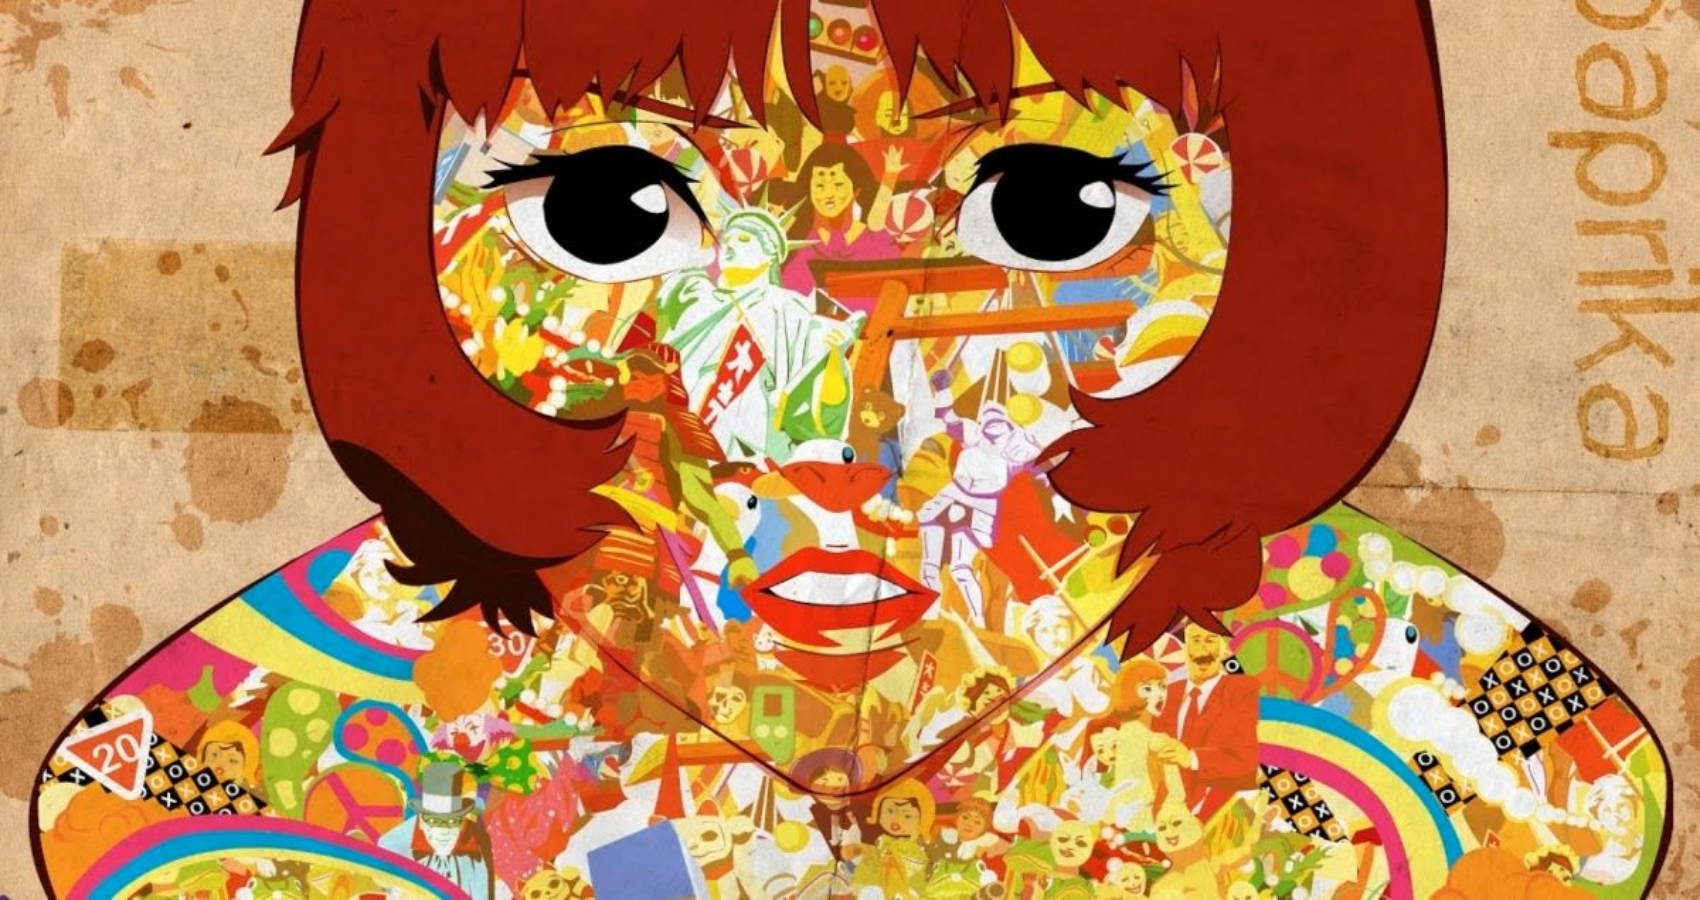 Paprika's face in a kaleidoscope of colors